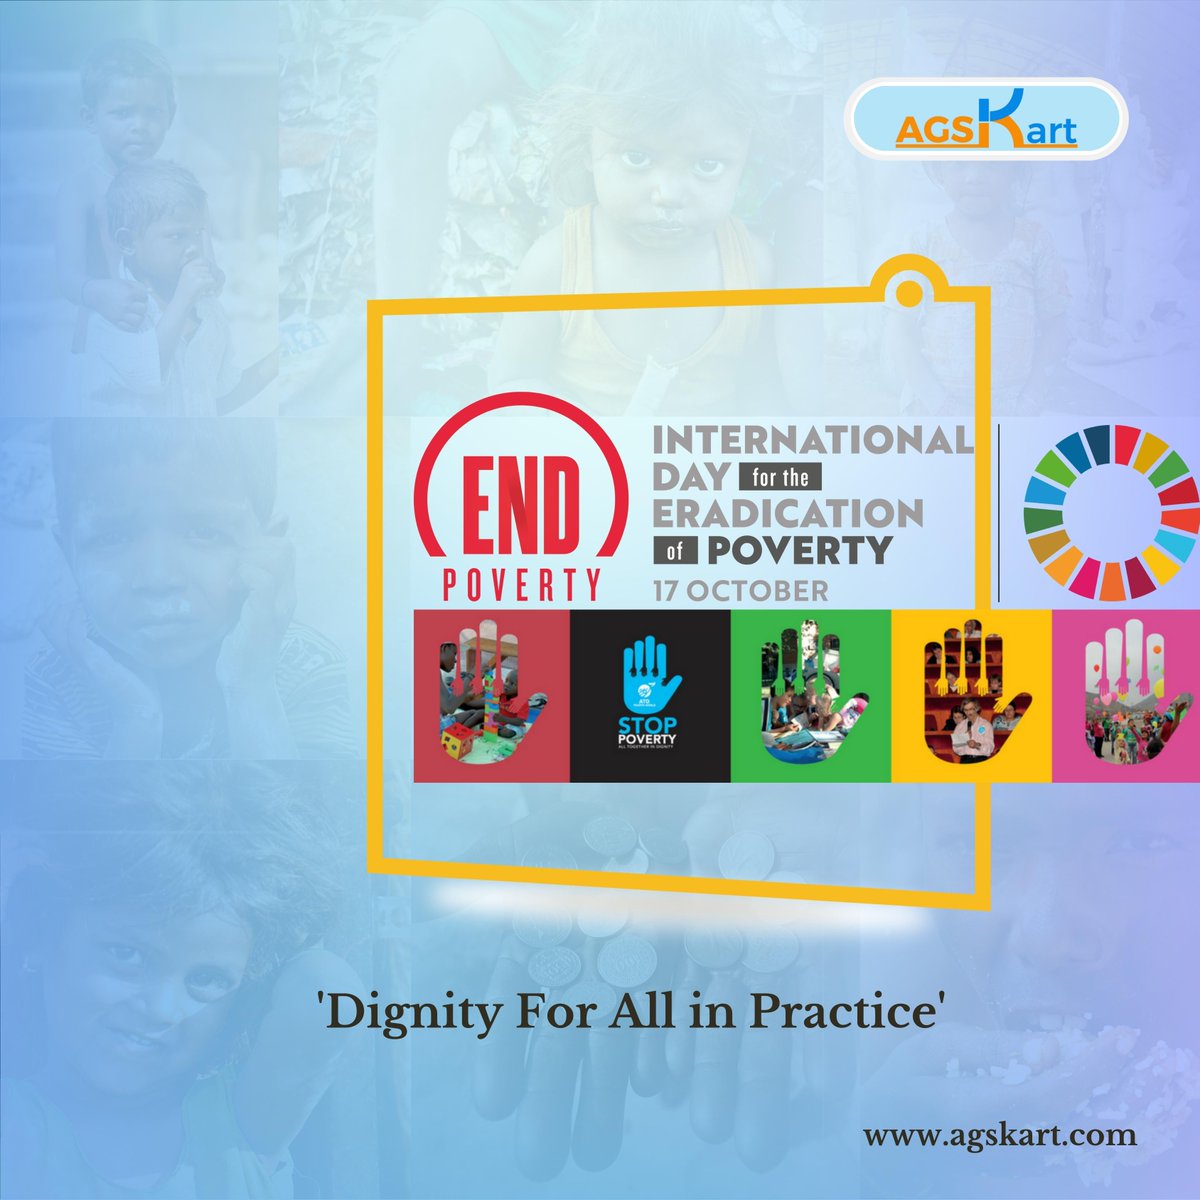 'International Day for the Eradication of Poverty'
#eradicationofpoverty #internationaldayfortheeradicationofpoverty #poverty #endpoverty #endperiodpoverty #endchildfoodpoverty #stoppoverty